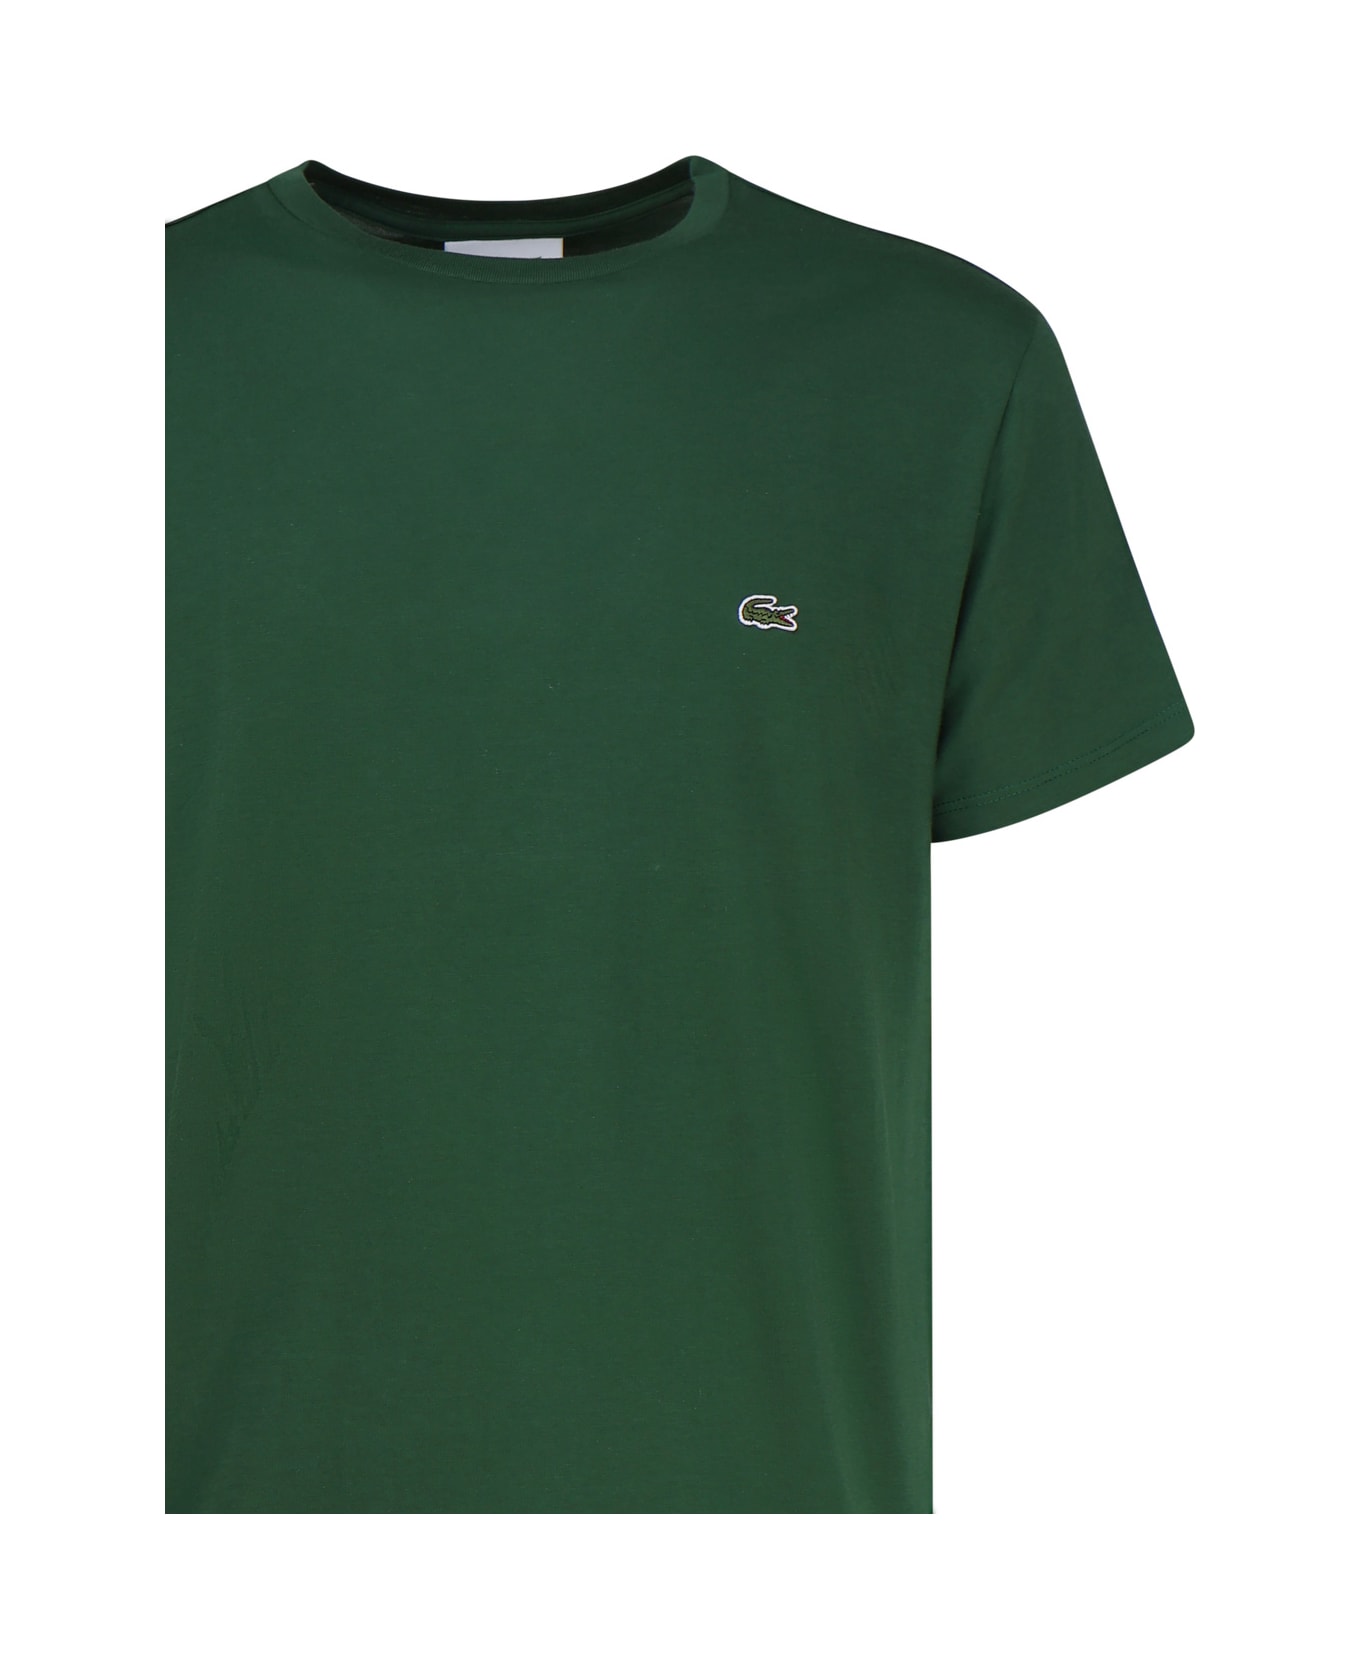 Lacoste Green T-shirt In Cotton Jersey Lacoste